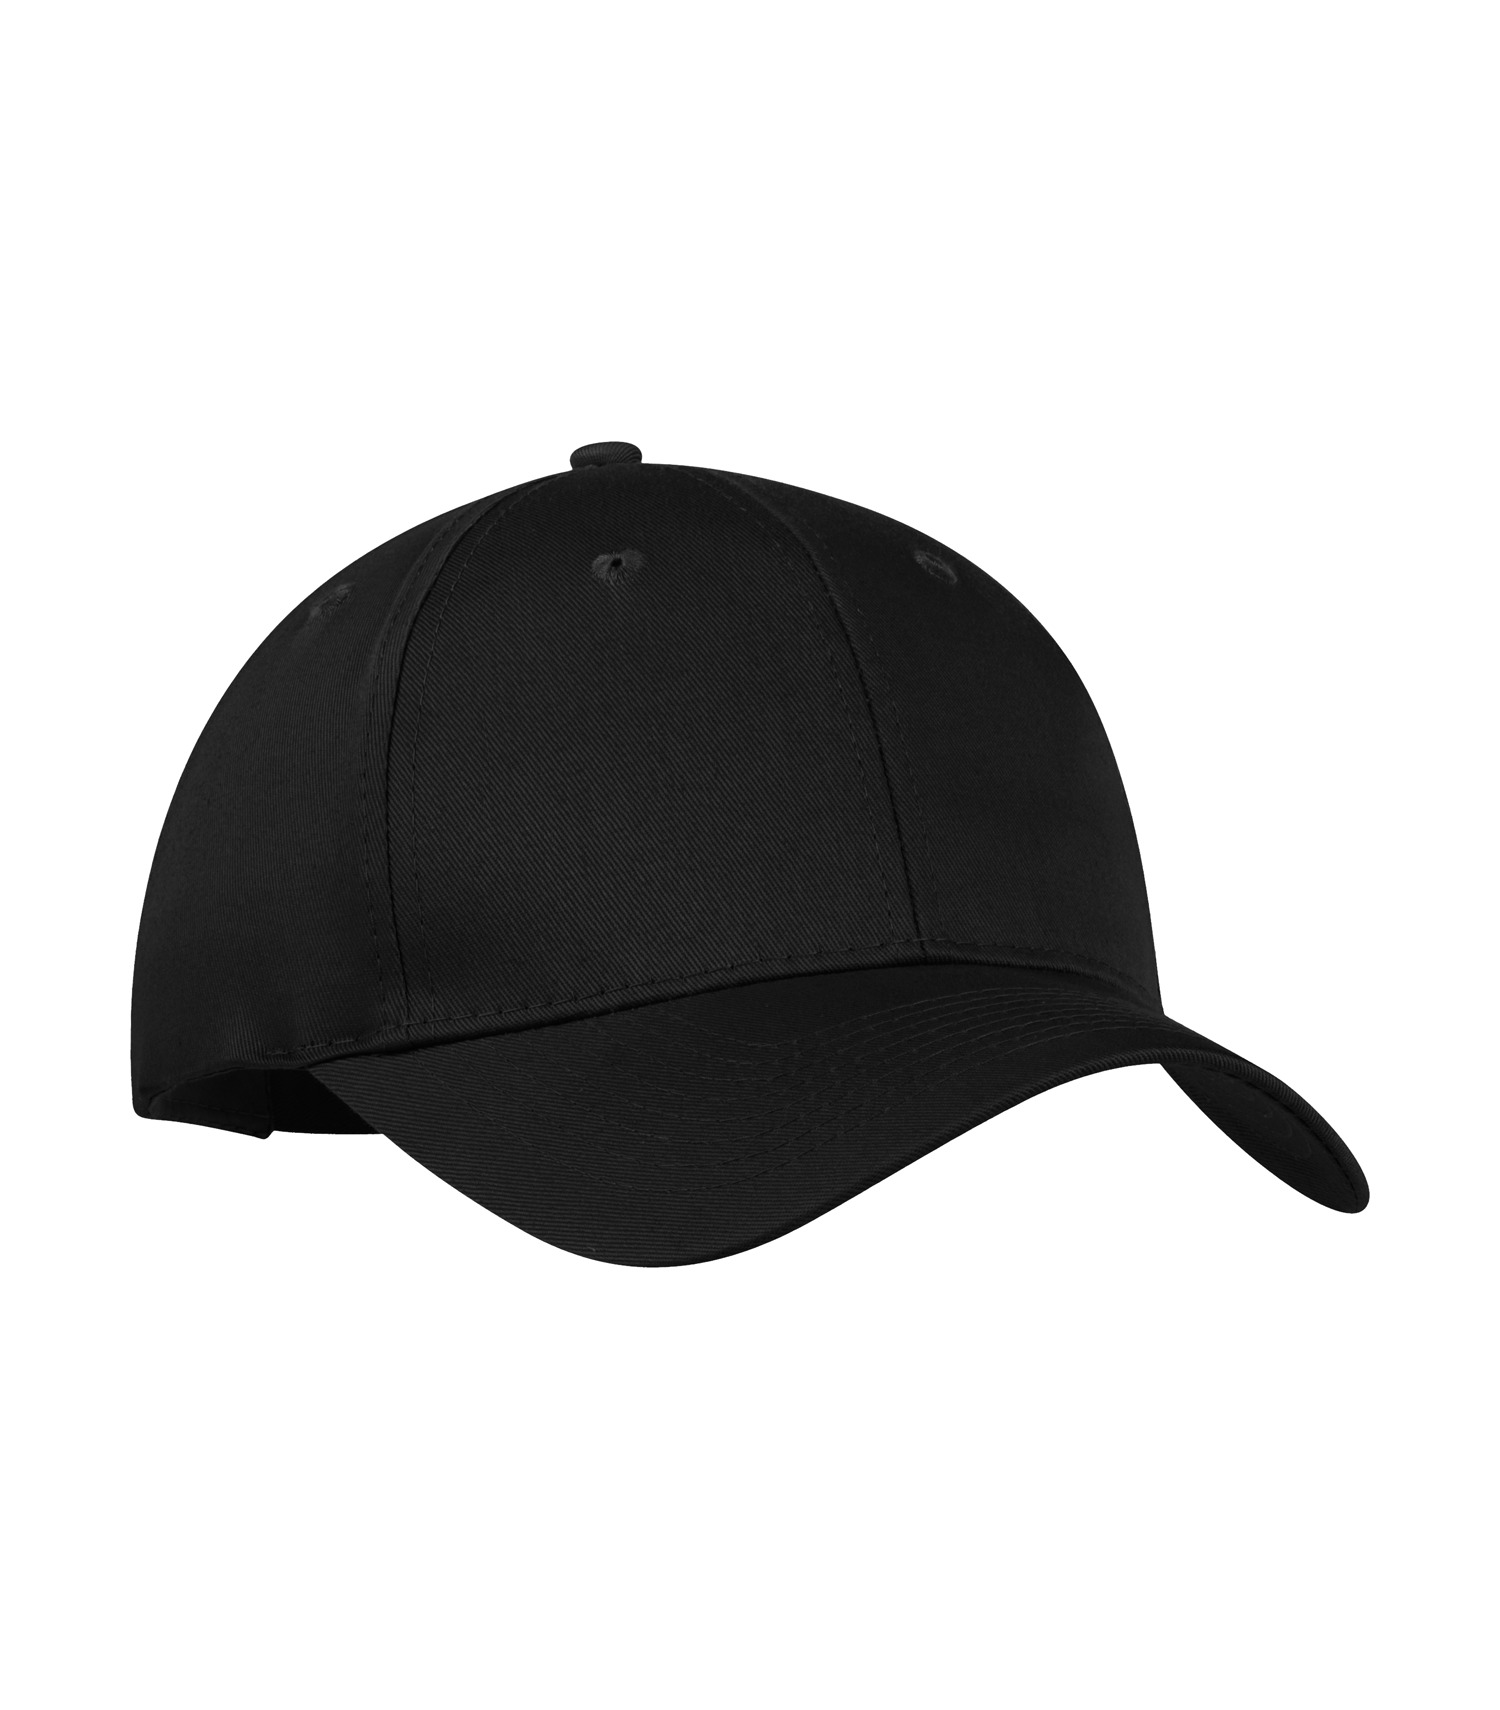 ATC™ EVERYDAY COTTON TWILL YOUTH CAP. Y130